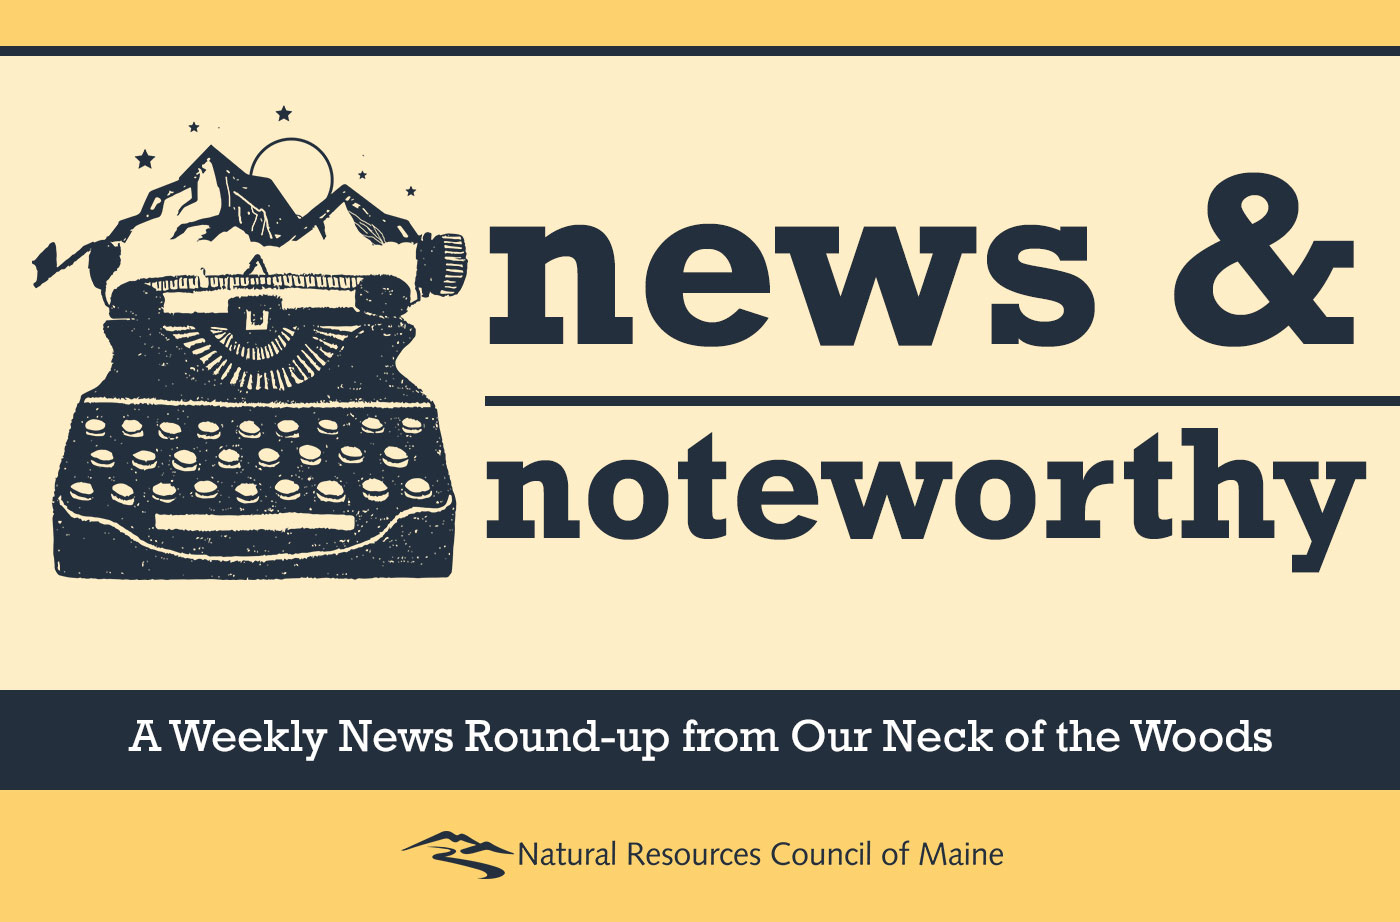 News & Noteworthy from NRCM